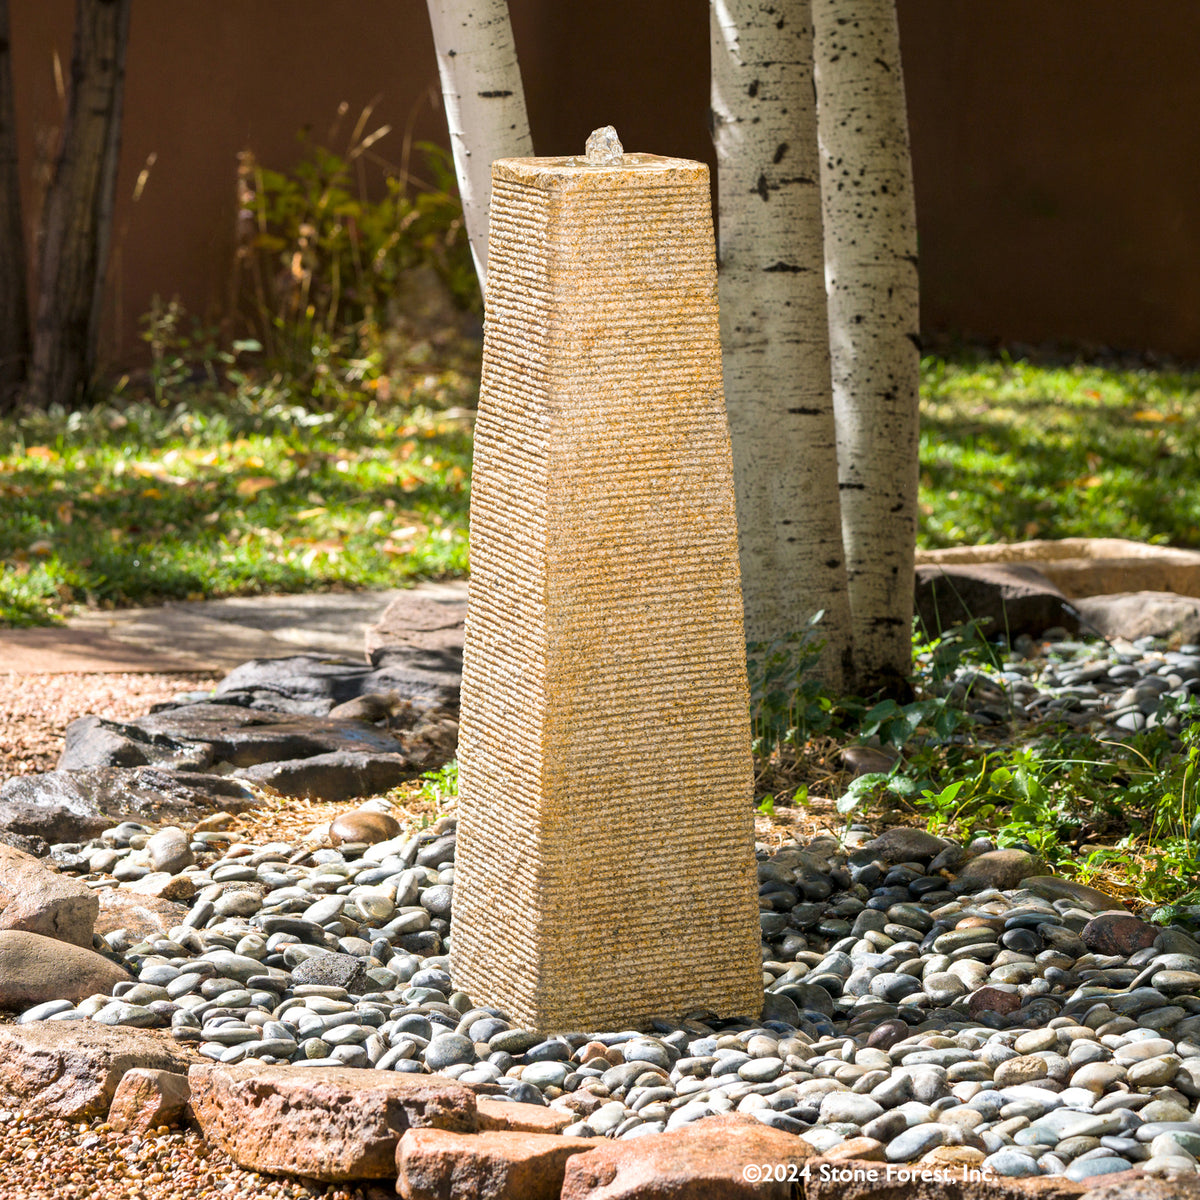 The Obelisk Fountain is a stone pillar, typically having a square cross-section and a pyramidal top. Set it up as a monument or landmark. Carved from Beige Granite. image 2 of 2